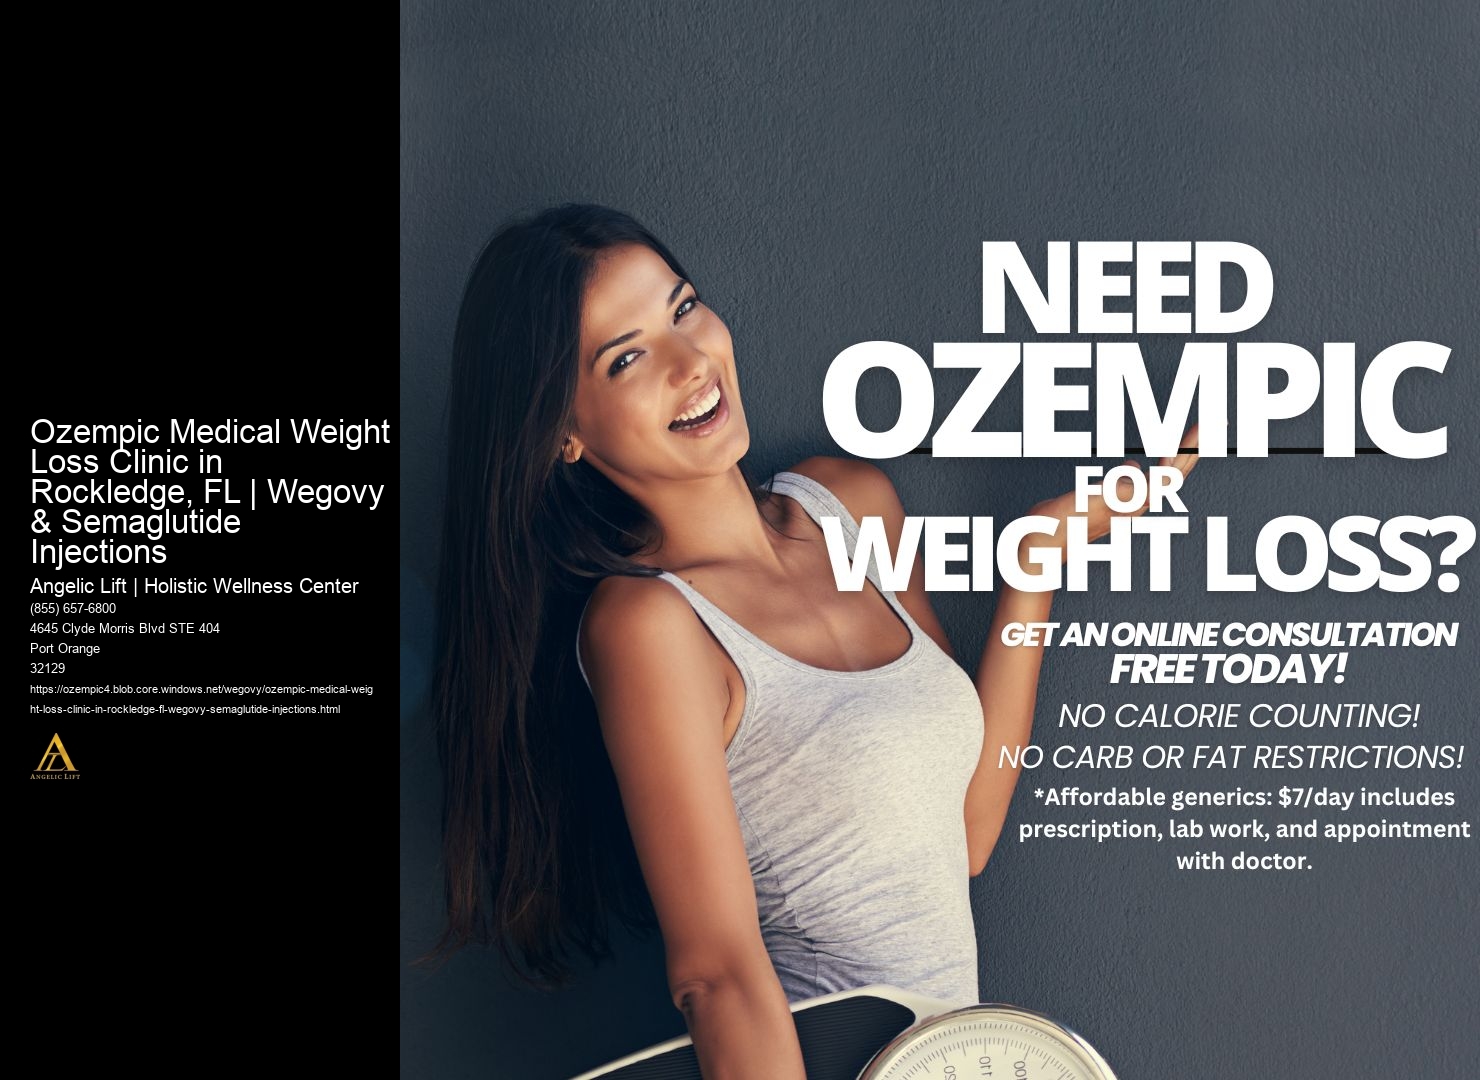 Ozempic Medical Weight Loss Clinic in Rockledge, FL | Wegovy & Semaglutide Injections